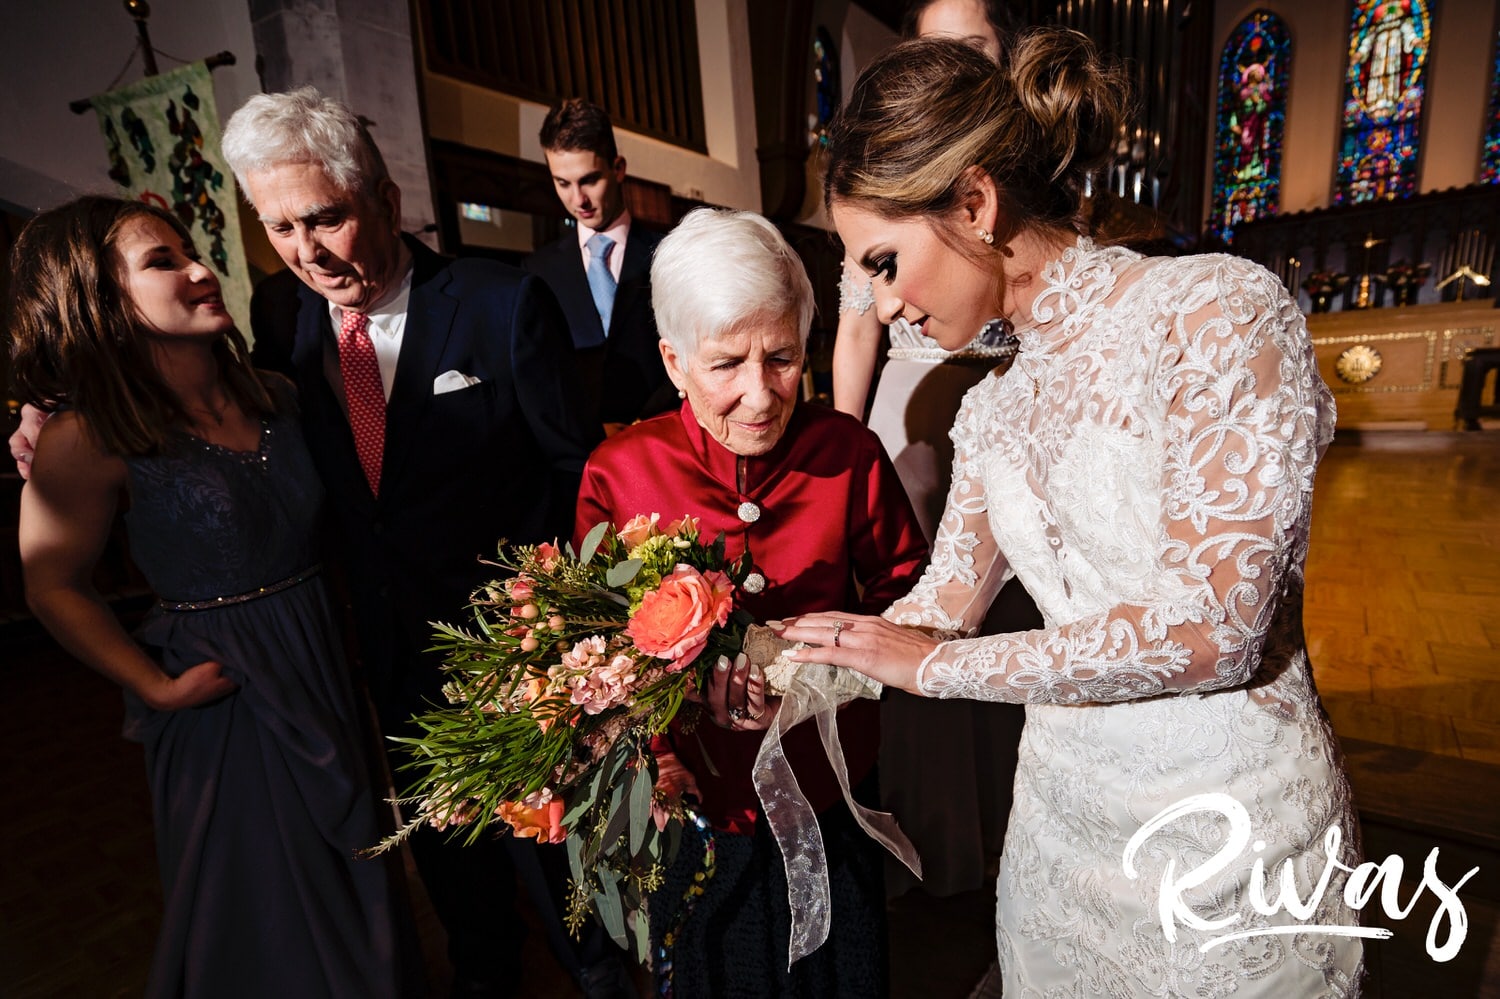 A candid, colorful picture of a bride showing her grandmother the lace wrapped around her bouquet's steps on her wedding day. 